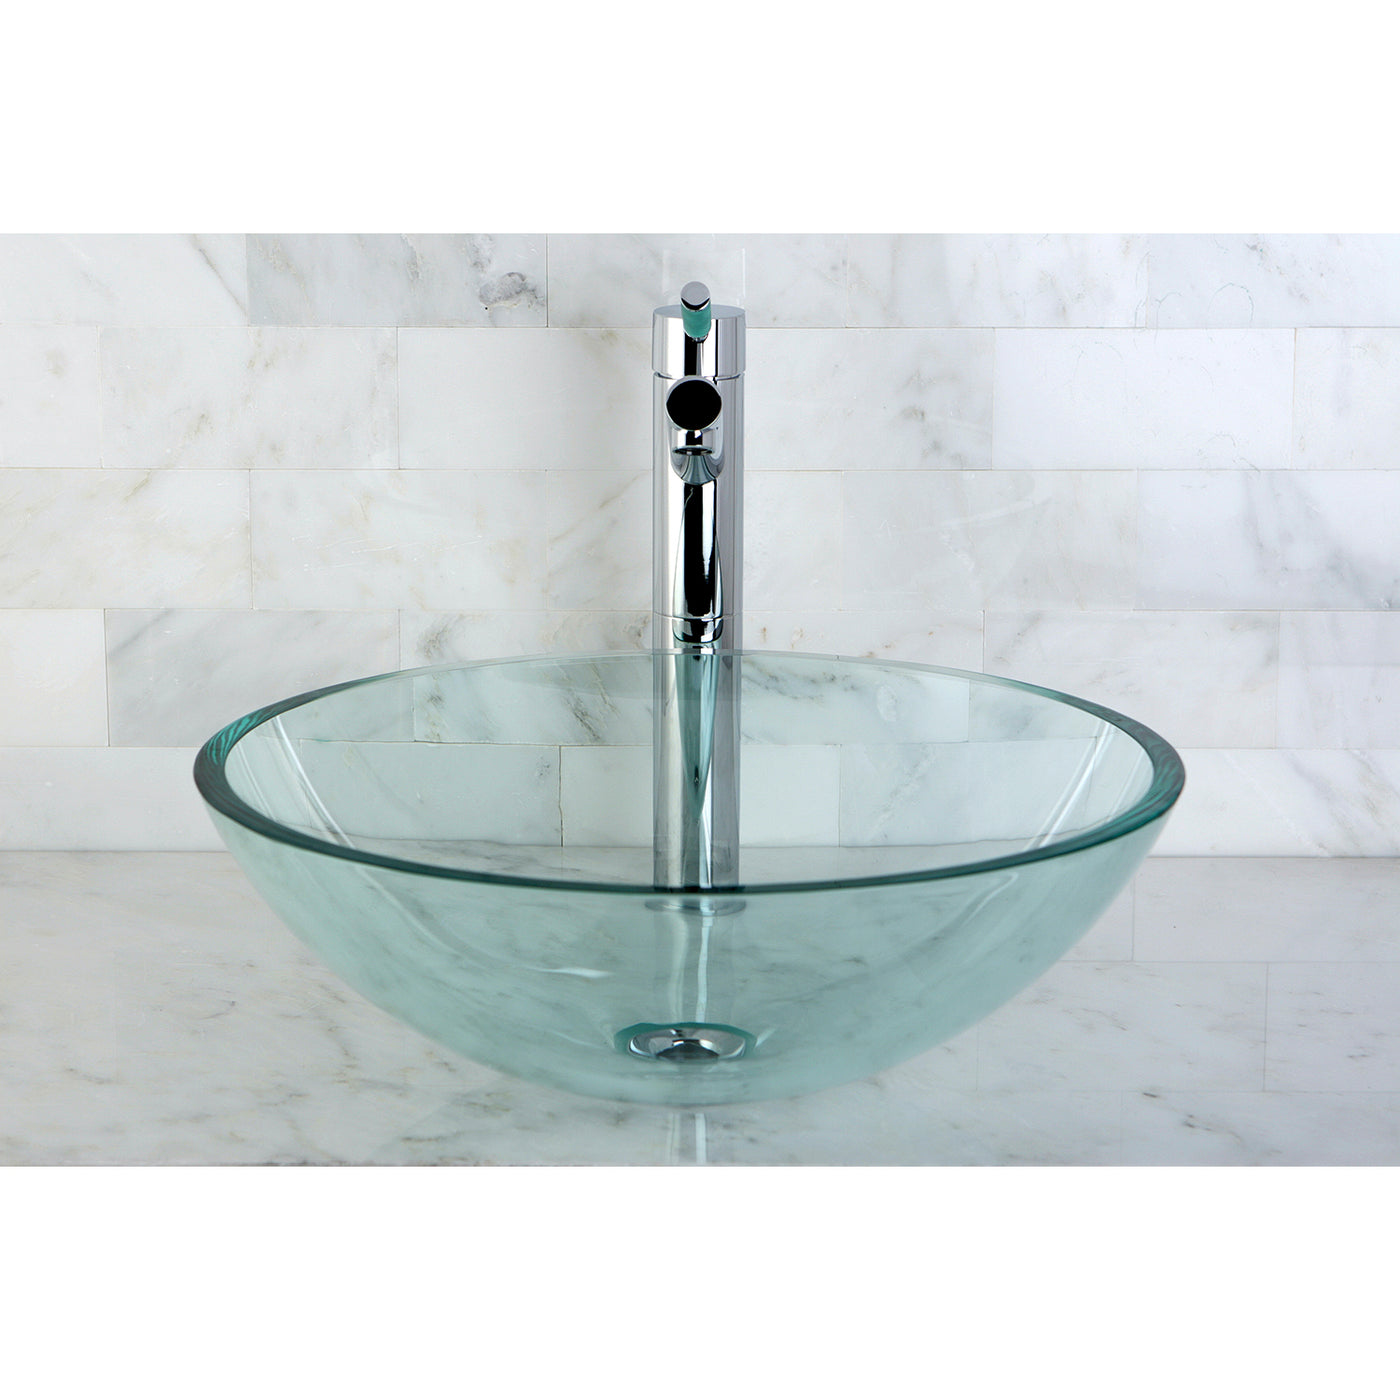 Elements of Design EDVSPCC1 16-1/2 Inch Round Tempered Glass Vessel Sink, Crystal Clear